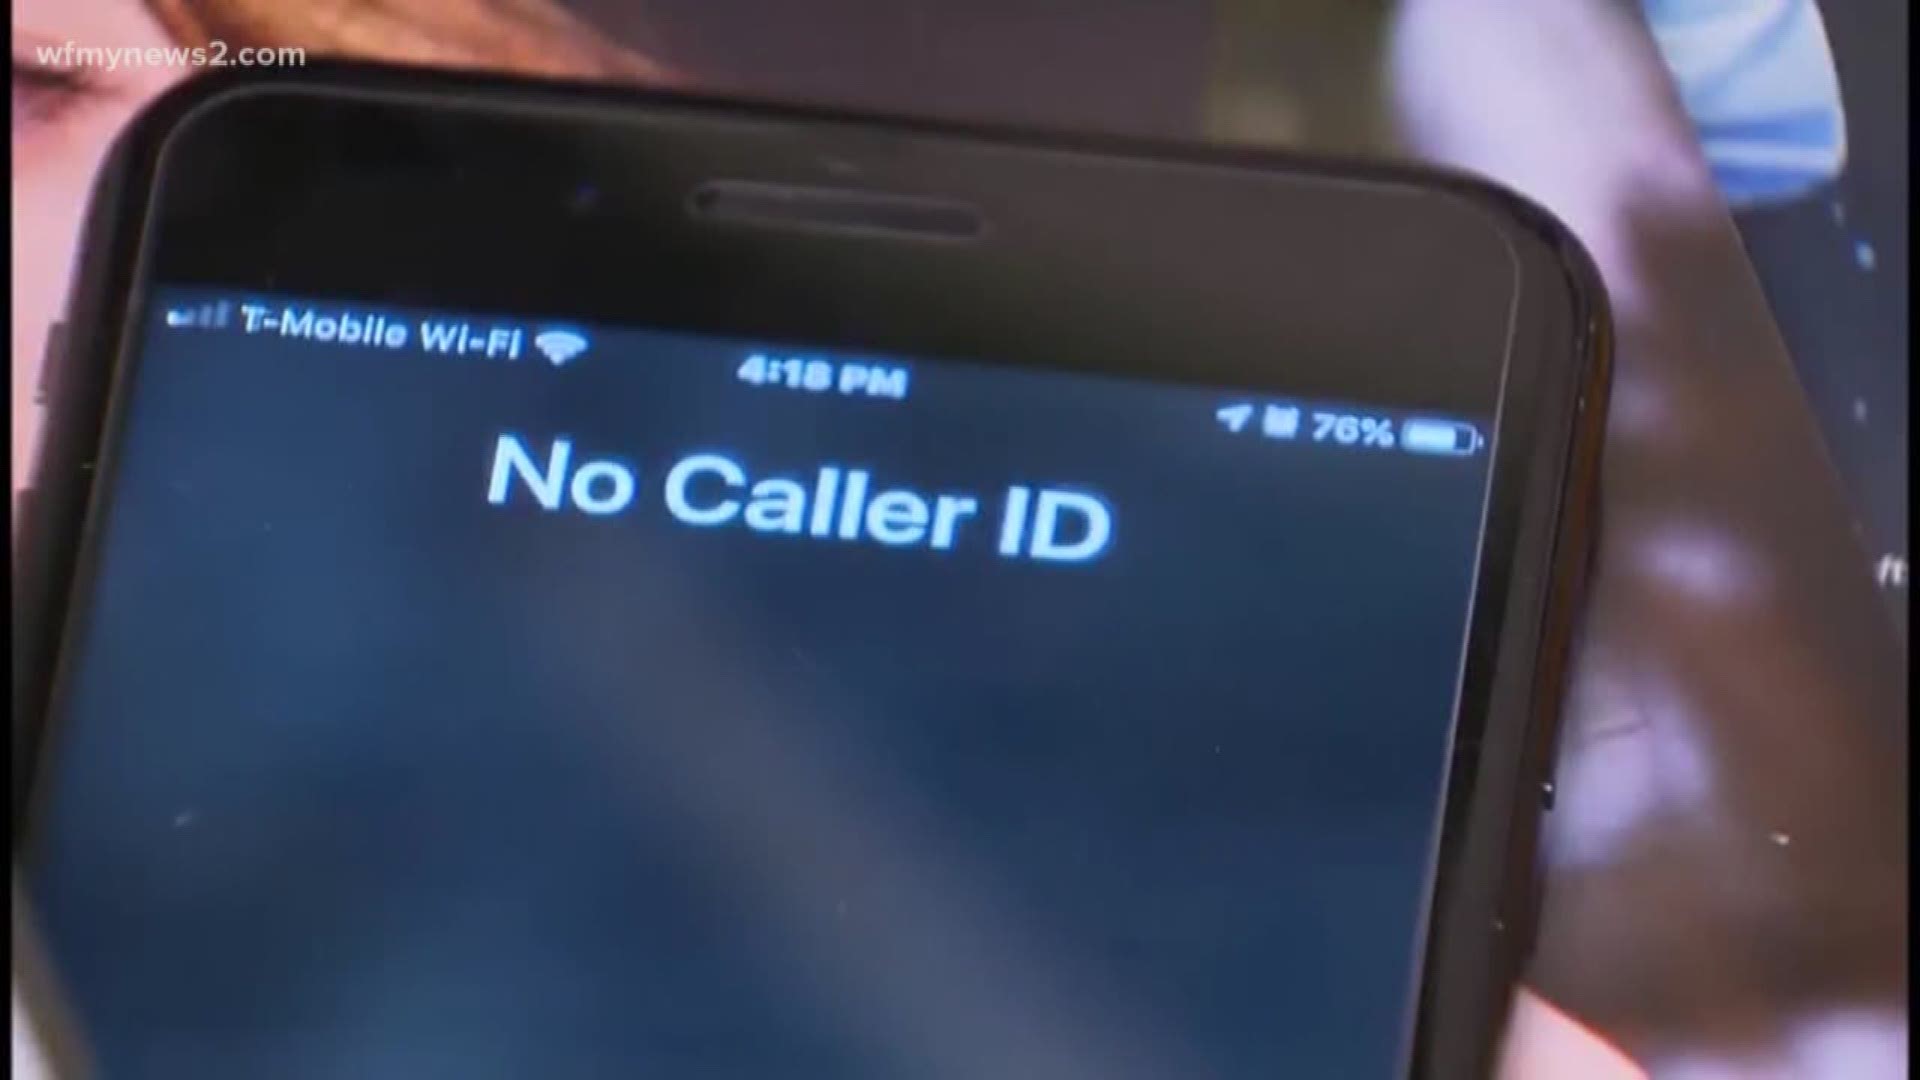 Depending on the company, it may be an illegal phone call, meaning they owe you money.